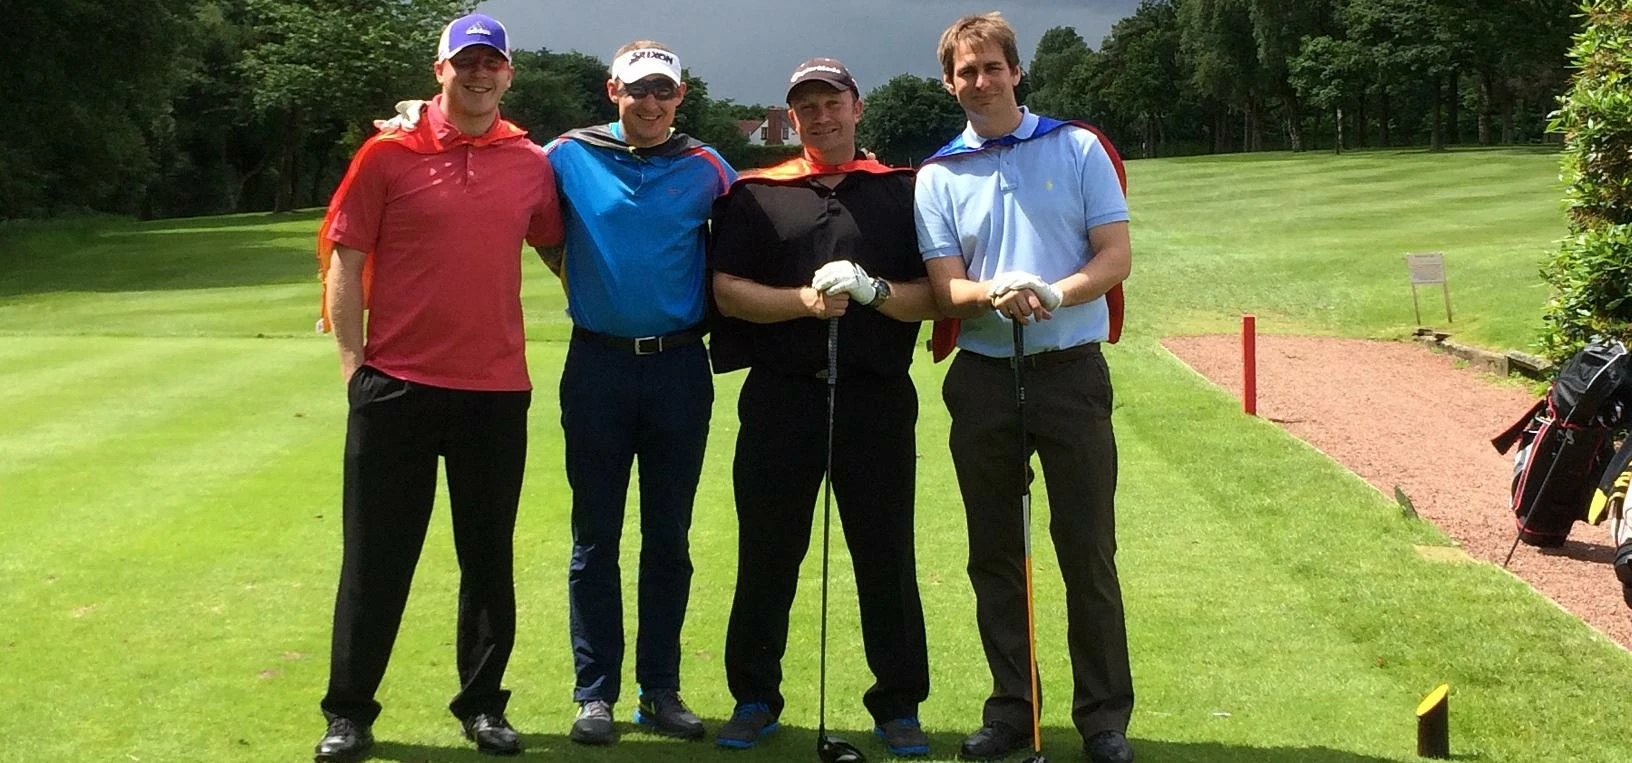 Nick Baxter (far right) with his team of golfing superheroes